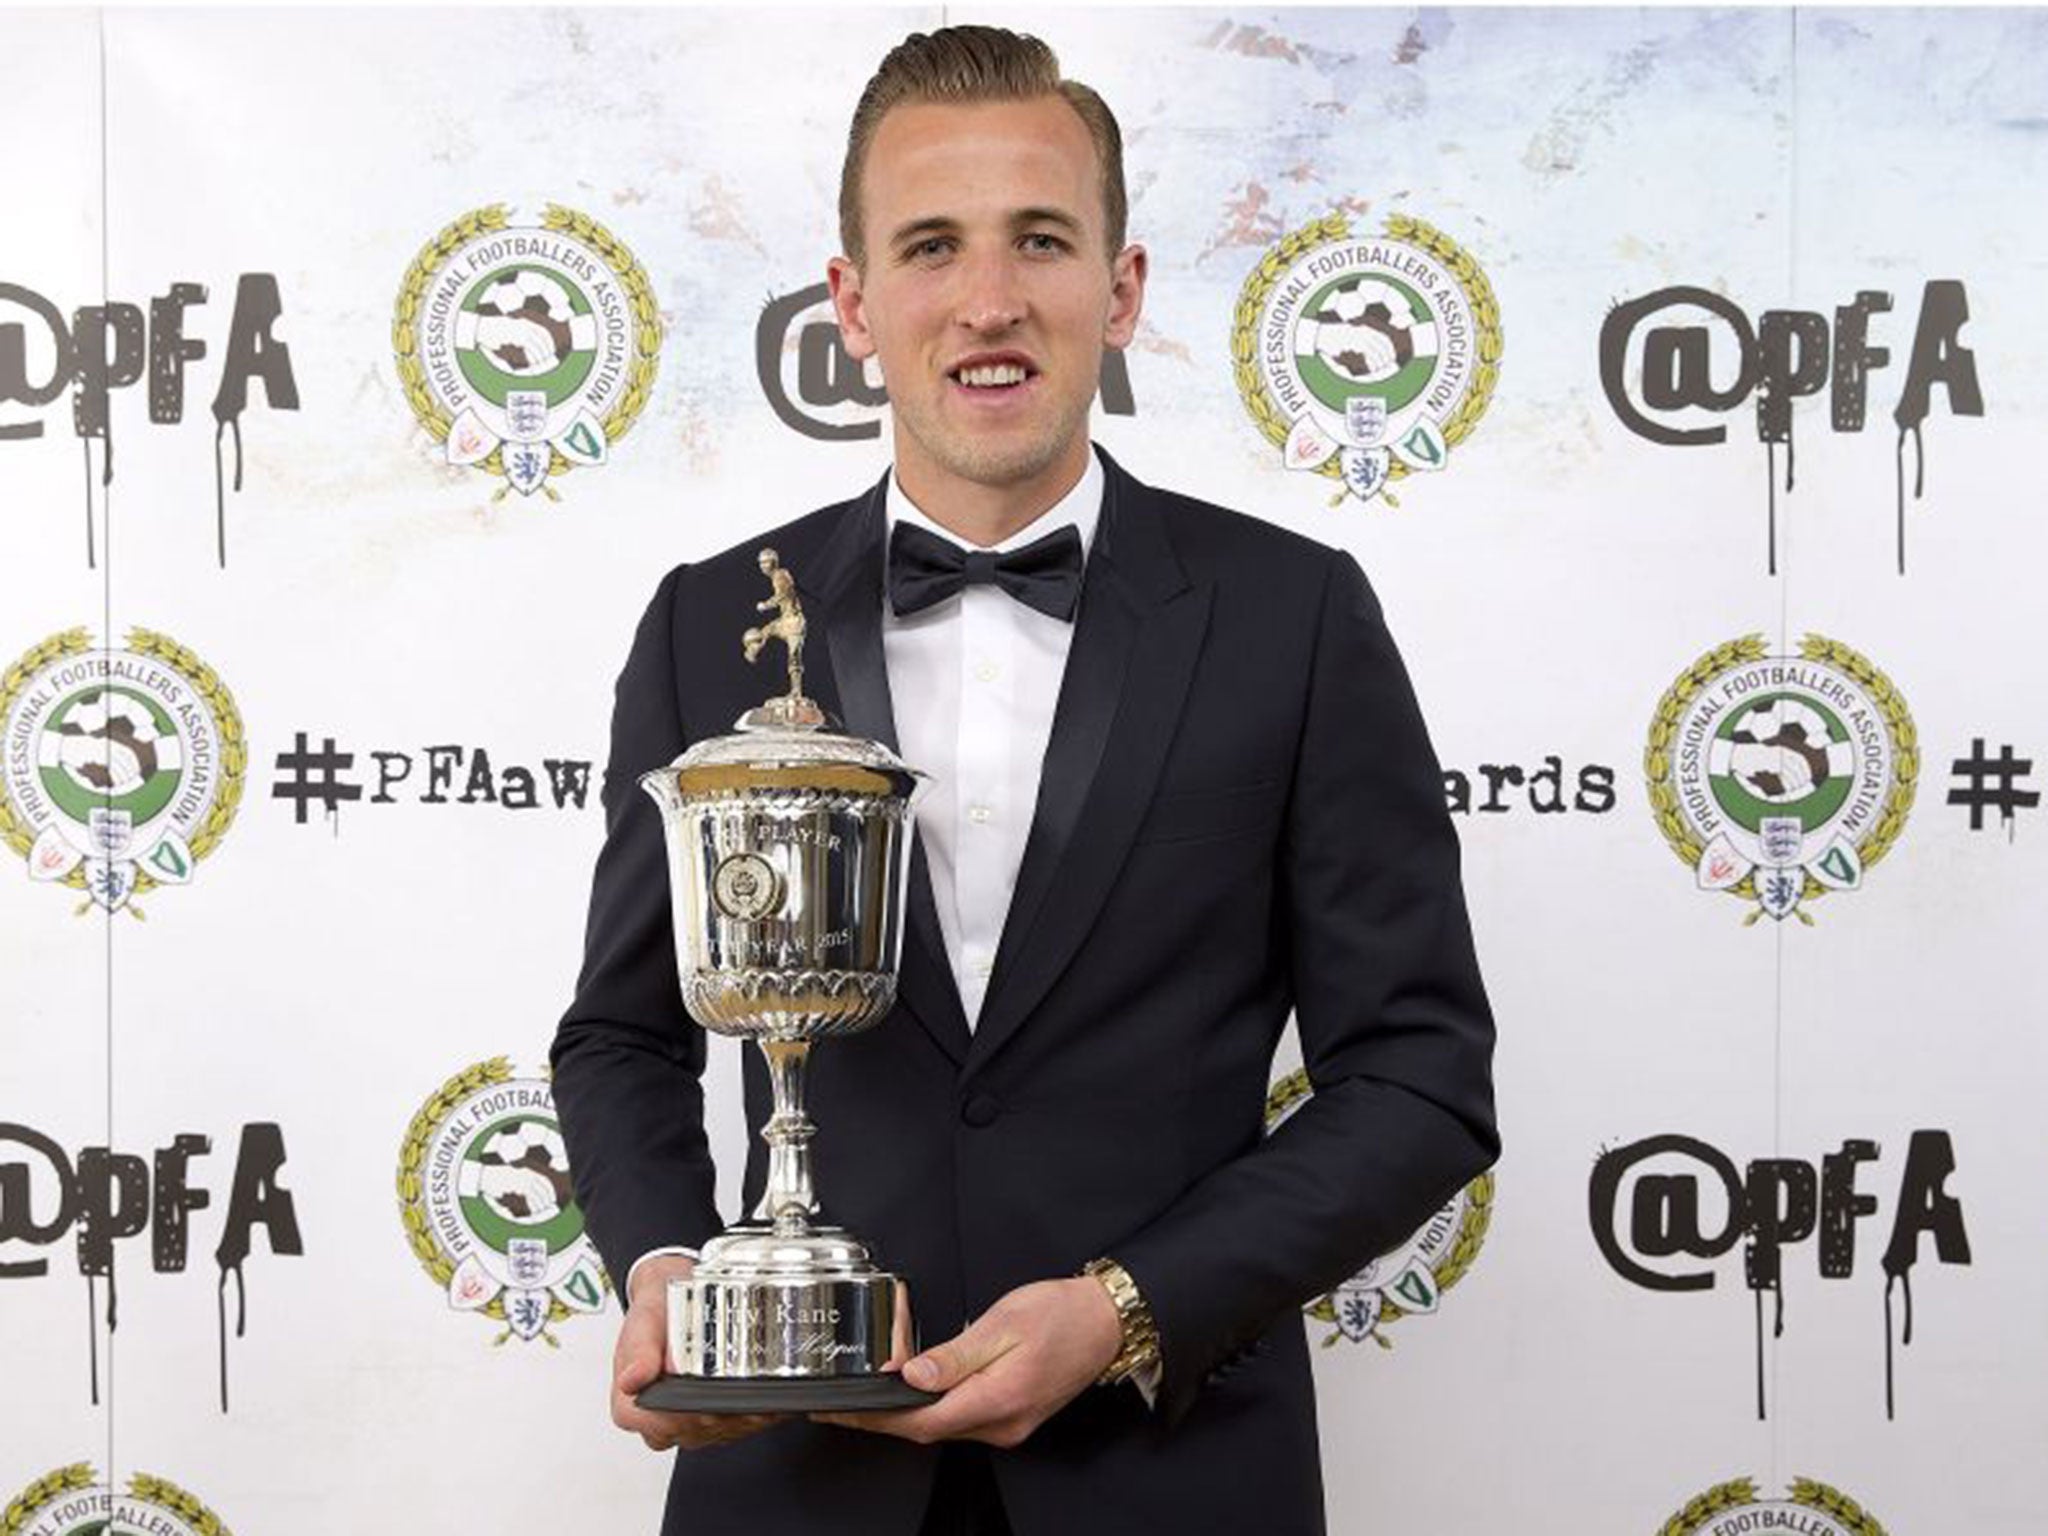 Harry Kane wins PFA Young Player of the Year award after 'unreal